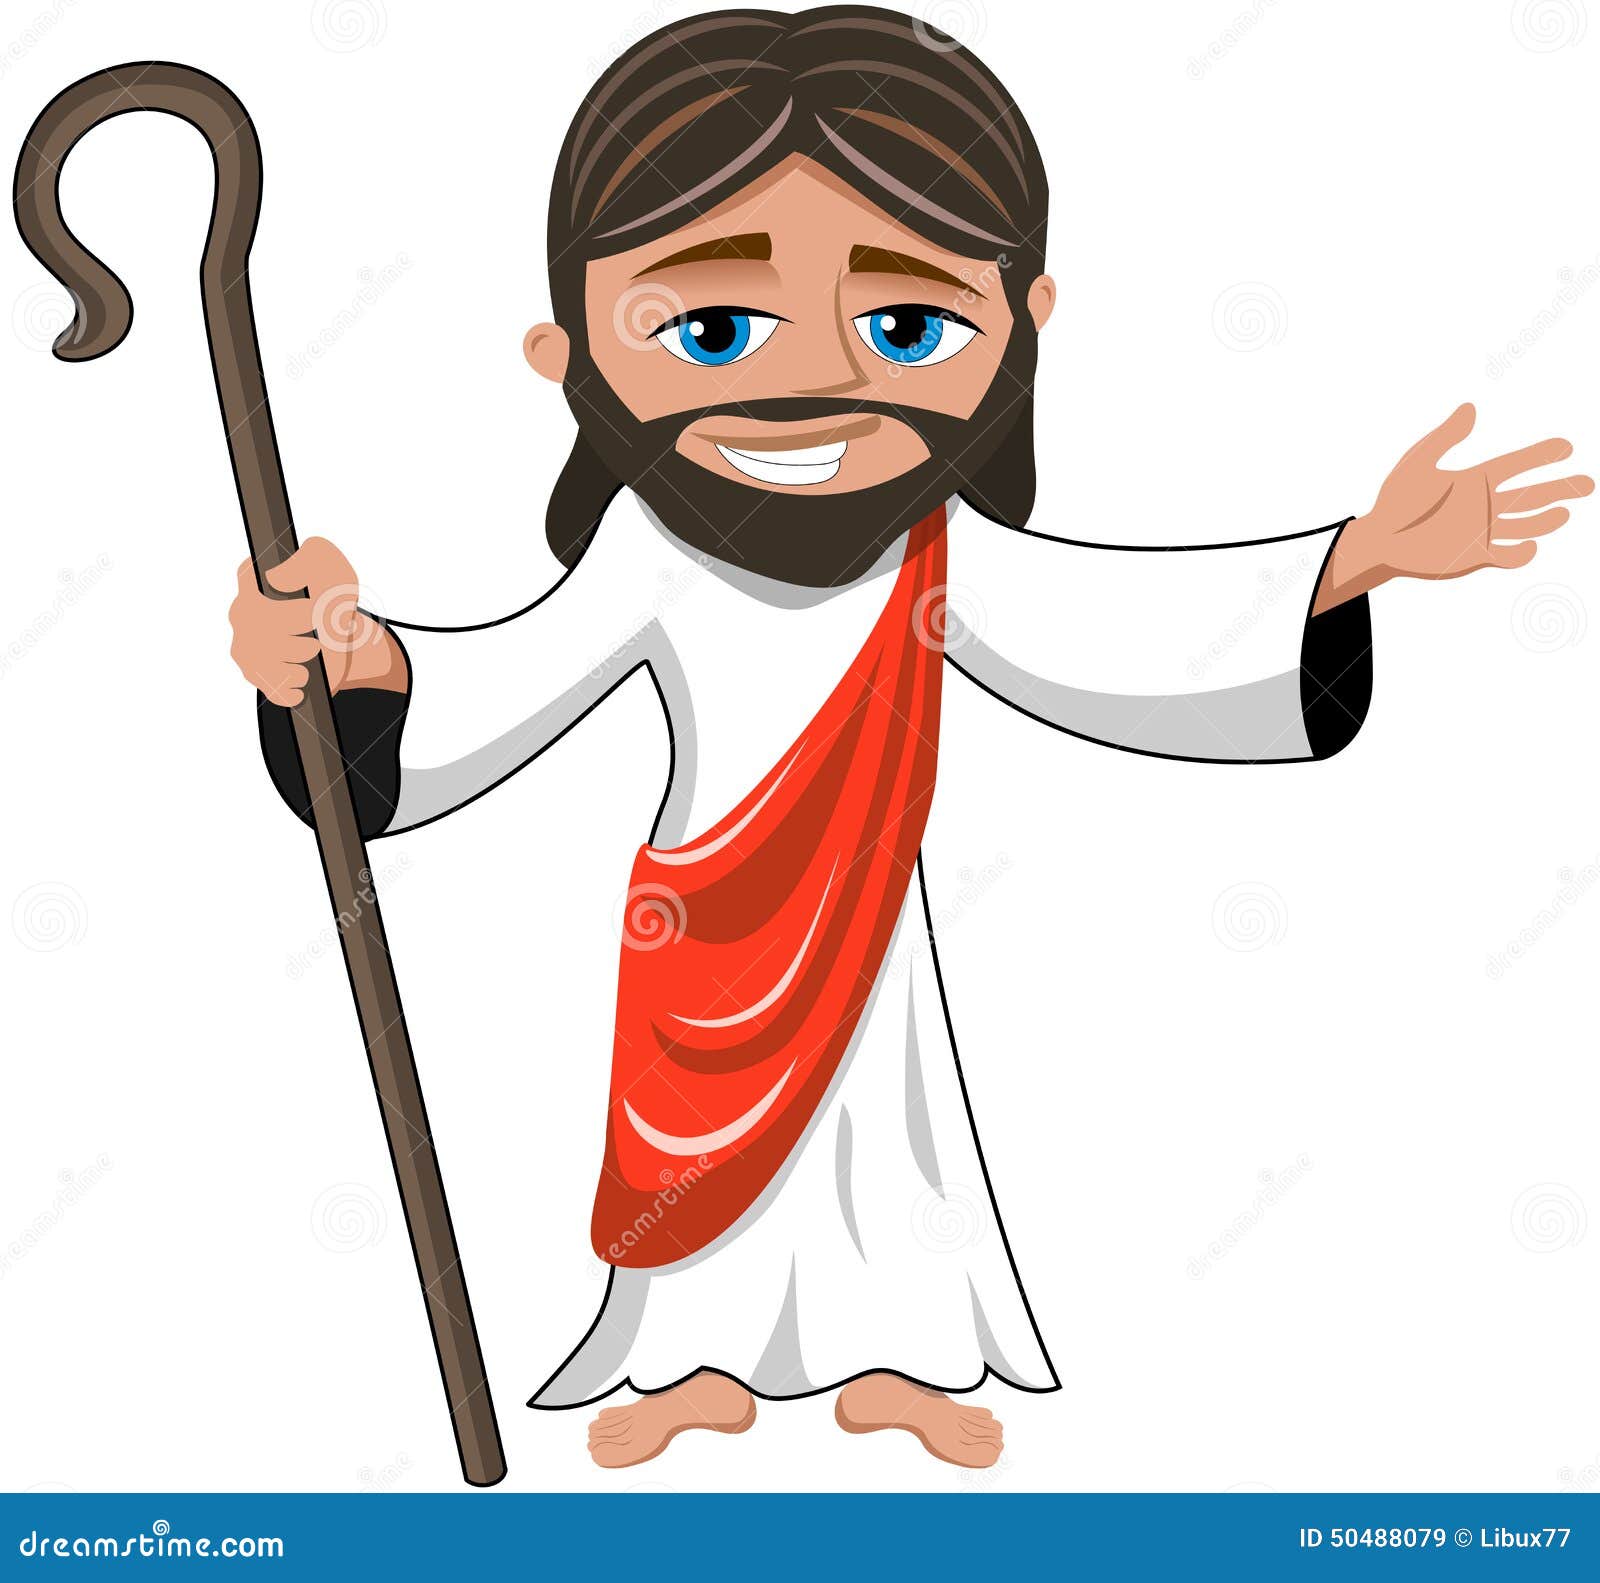 clipart jesus holding a man up - photo #4